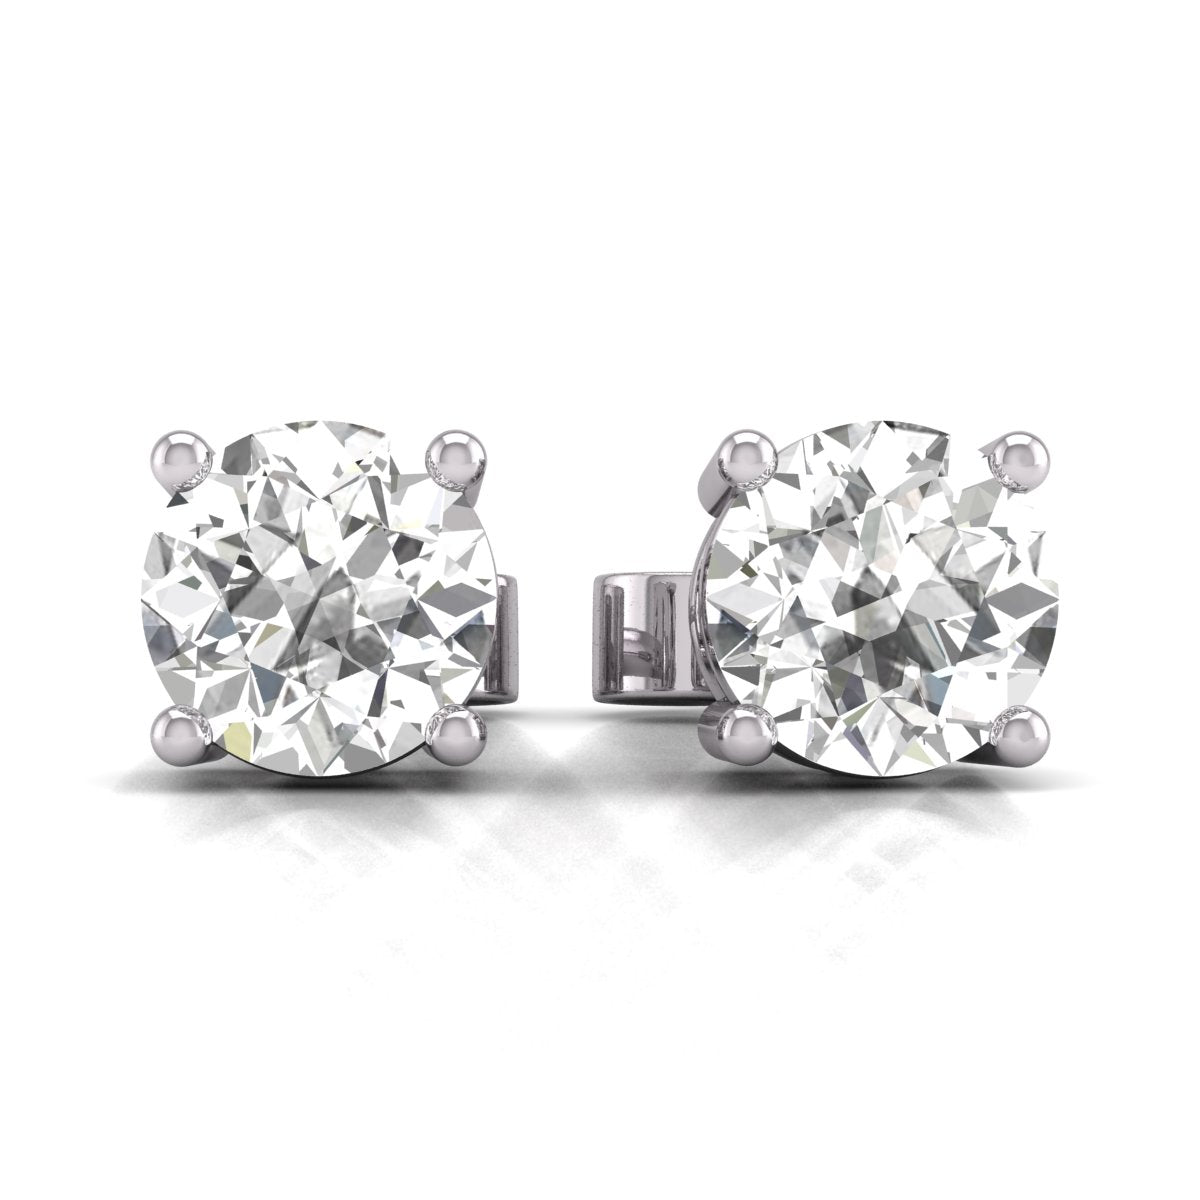 3/4 Carat TW Lab Grown Diamond Solitaire Stud Earrings in 14K White Gold with Secure Push Back 4 Prong Setting (F-G Color VS-SI Clarity)